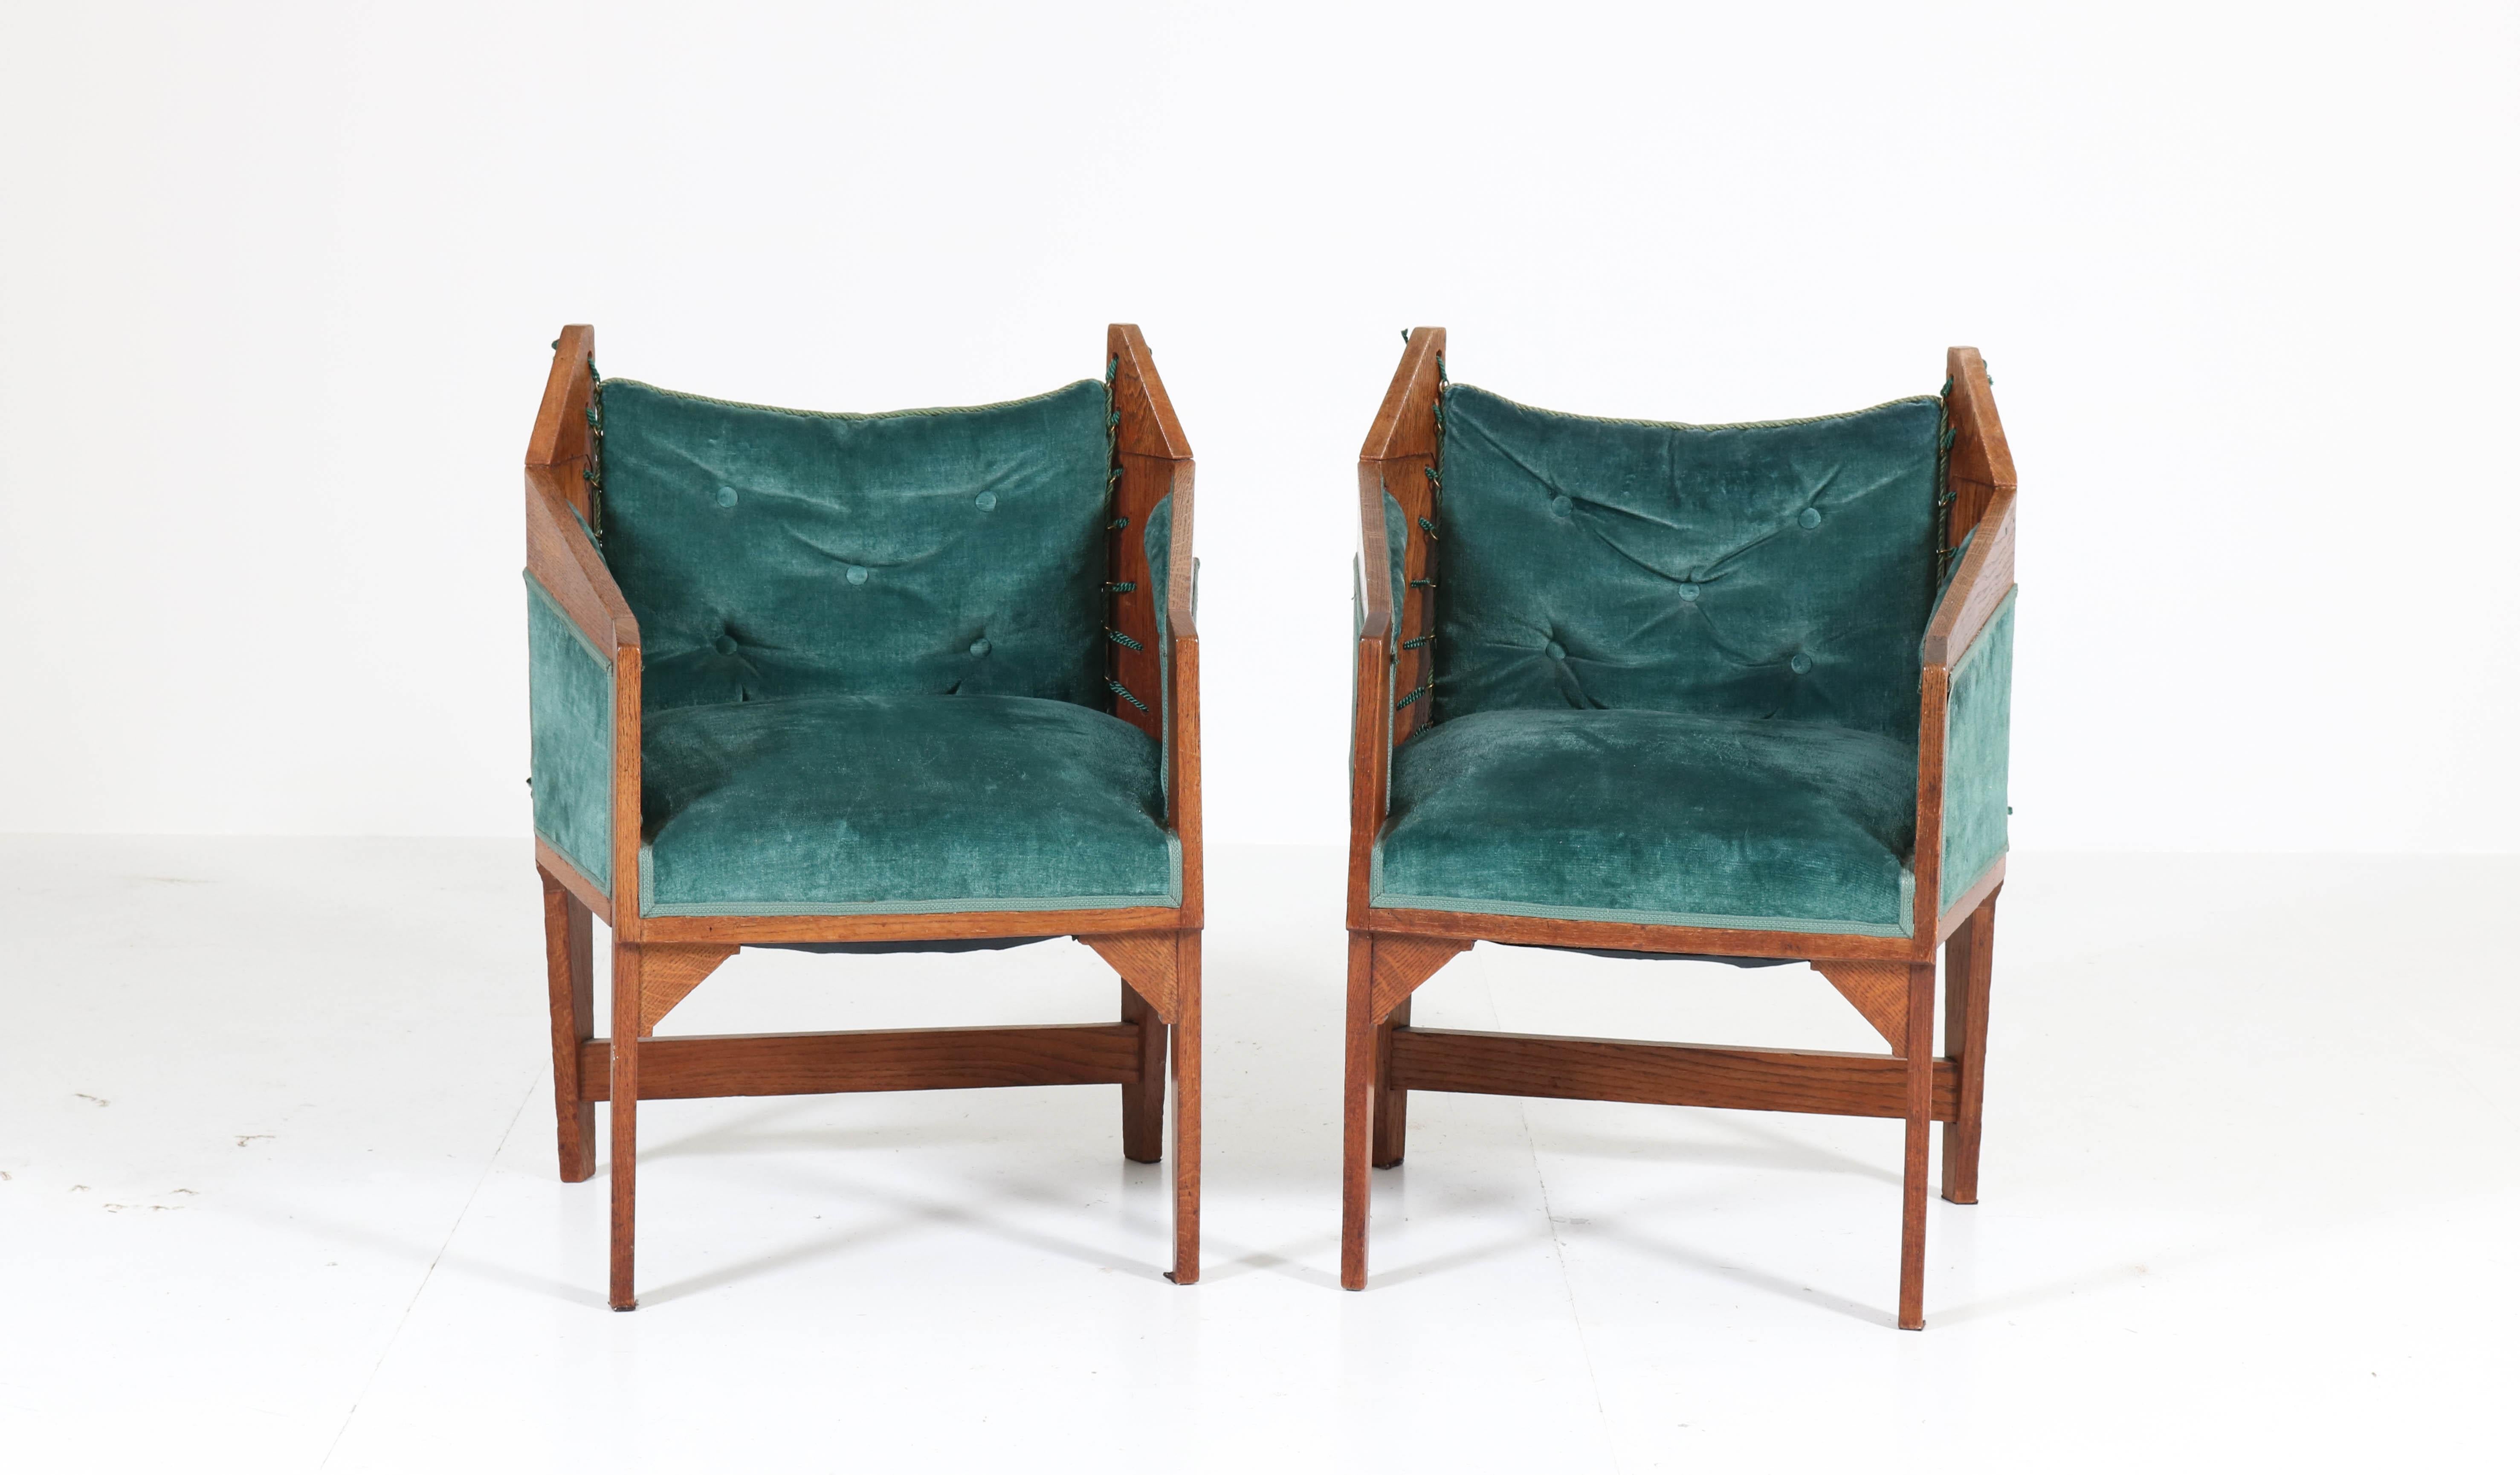 Stunning and rare pair of Art Deco Amsterdam School armchairs.
Design attributed to H. van Dorp.
Striking Dutch design from the 1920s.
Solid oak with green emerald upholstery.
In good original condition with minor wear consistent with age and